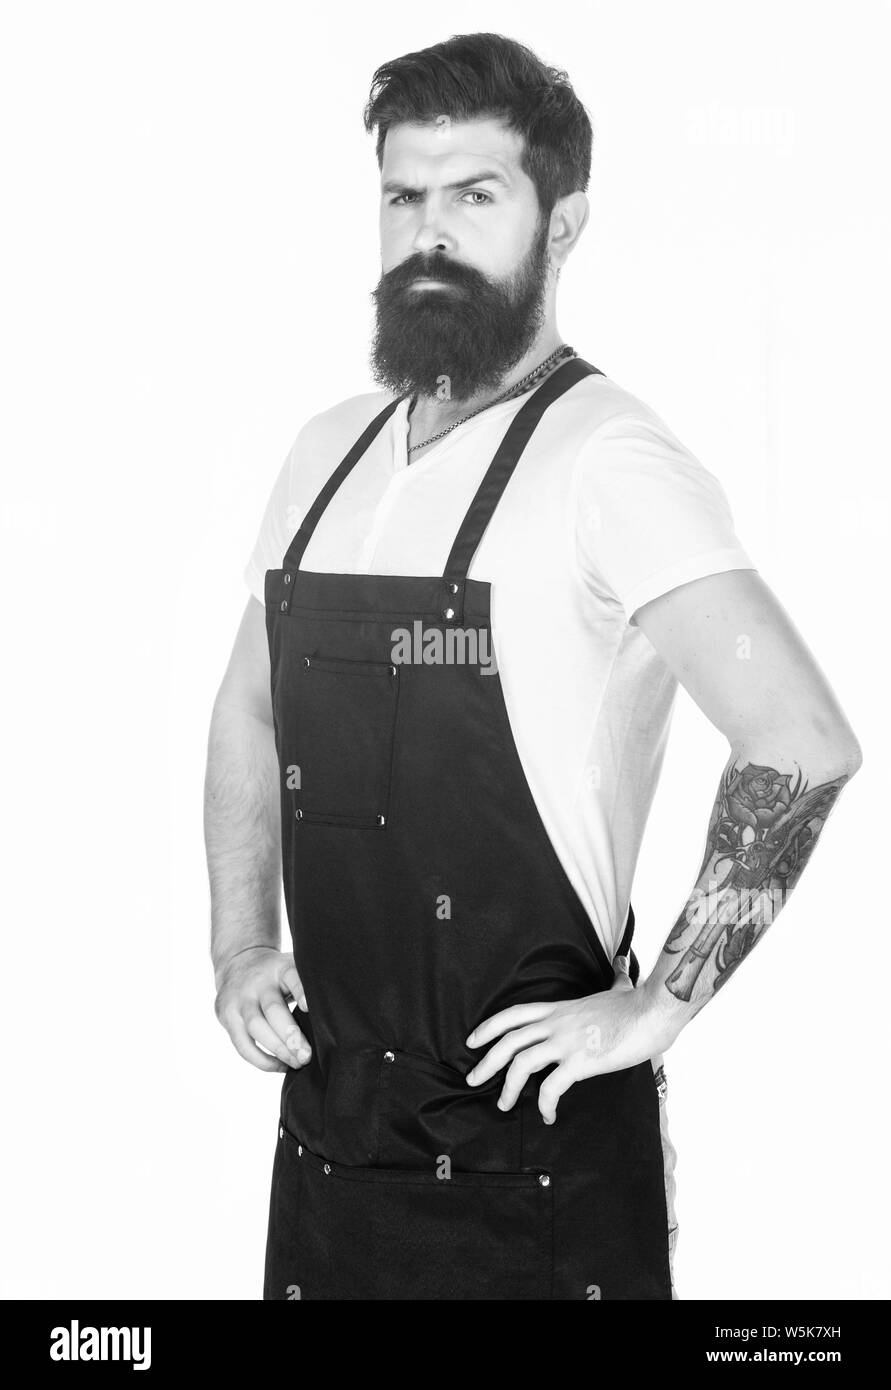 Theres no doubting he looks good. Bearded man wearing barber or cooking apron. Long bearded man keeping arms crossed. Hipster with bearded face. Bearded barber or cook. Stock Photo